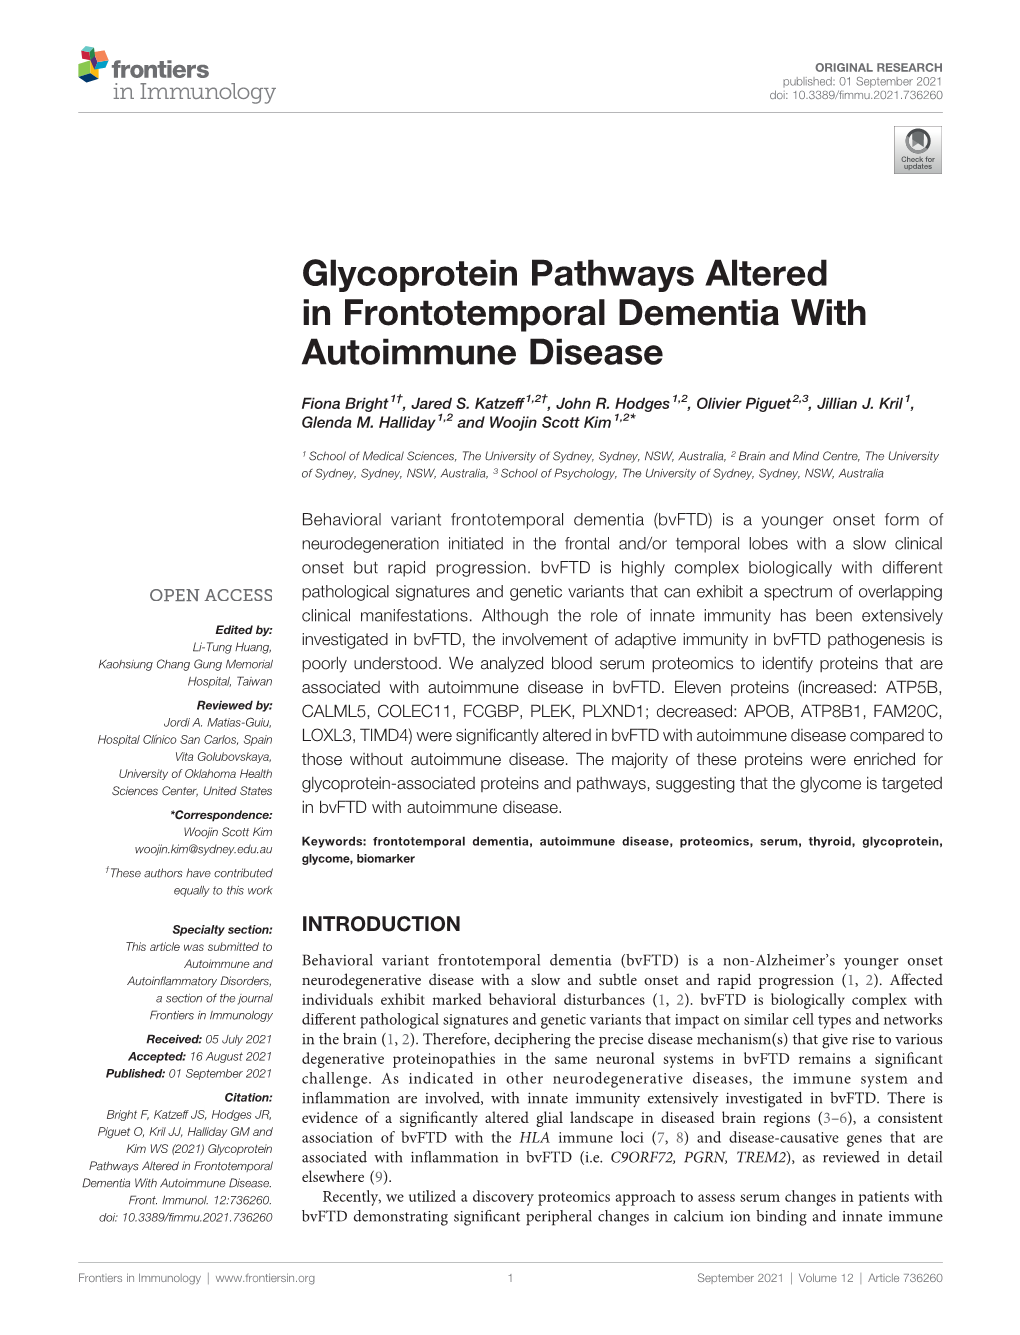 Glycoprotein Pathways Altered in Frontotemporal Dementia with Autoimmune Disease